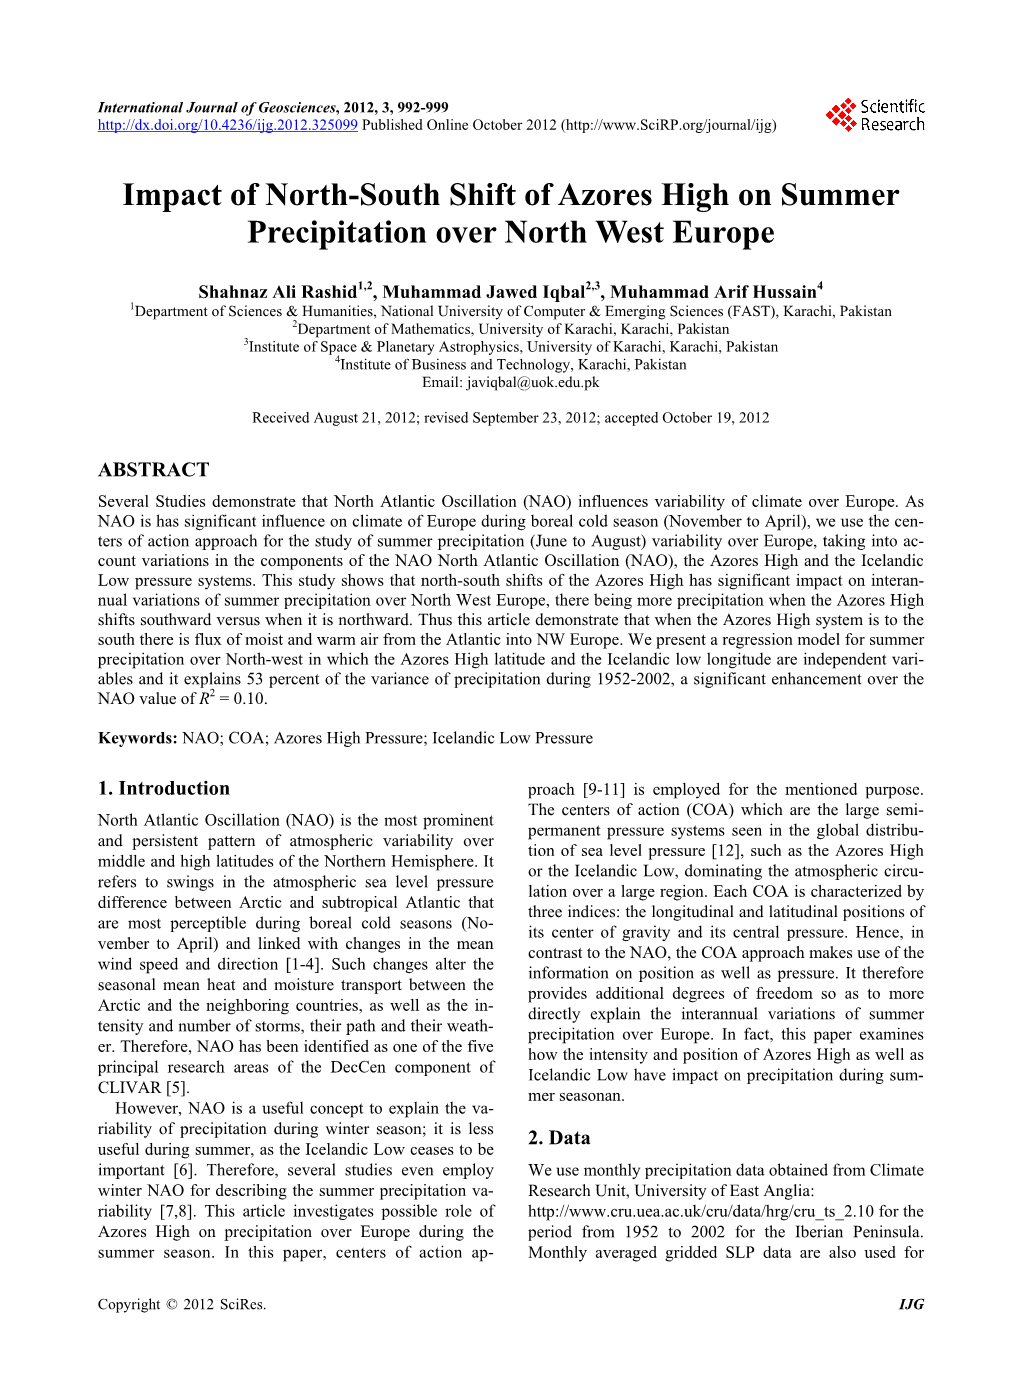 Impact of North-South Shift of Azores High on Summer Precipitation Over North West Europe